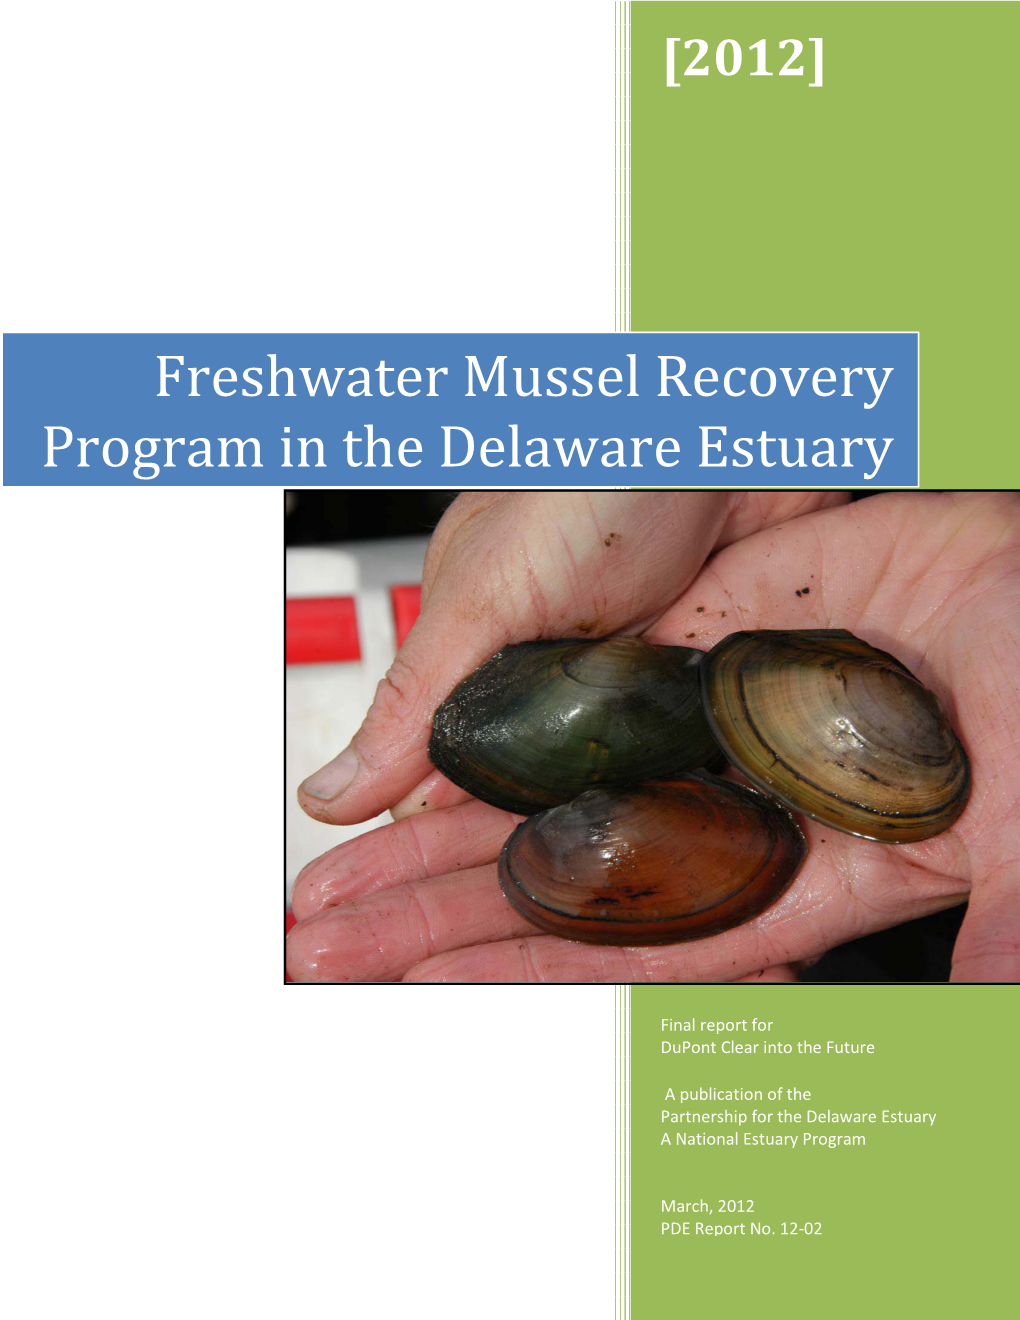 Freshwater Mussel Recovery Program in the Delaware Estuary